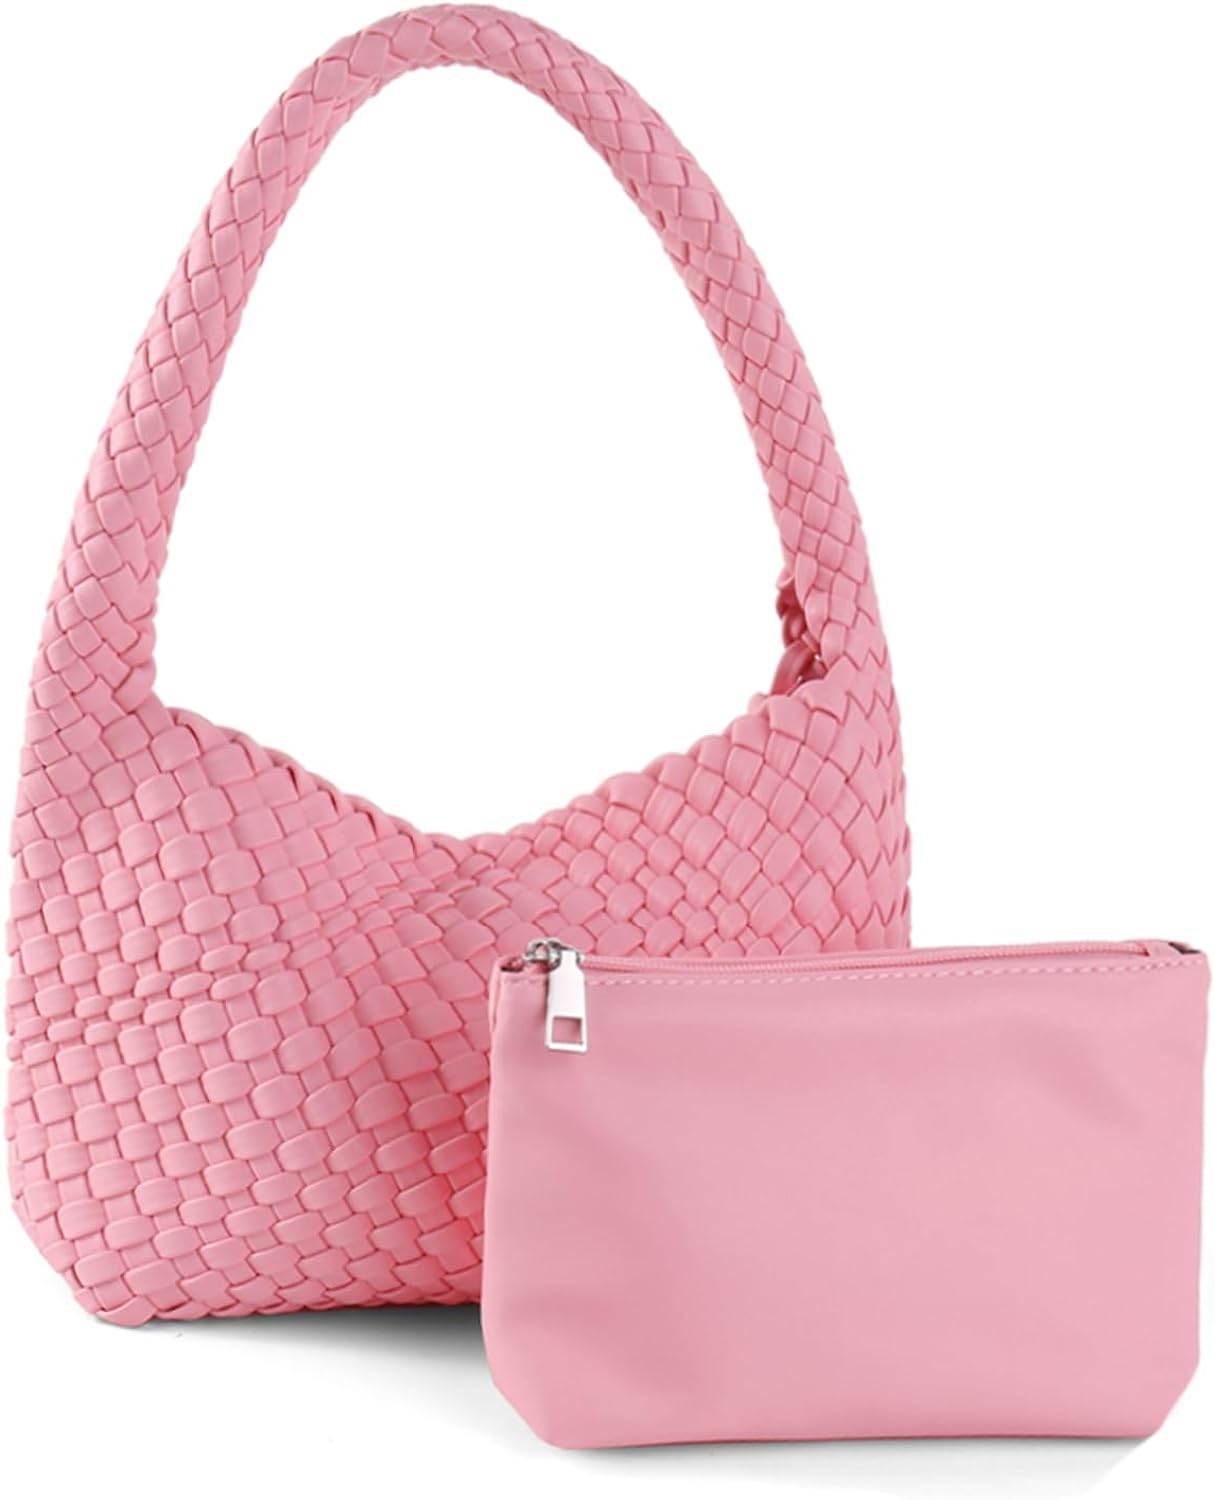 Soledad | Soft Woven Leather Tote - Light Pink / Small - AMVIM